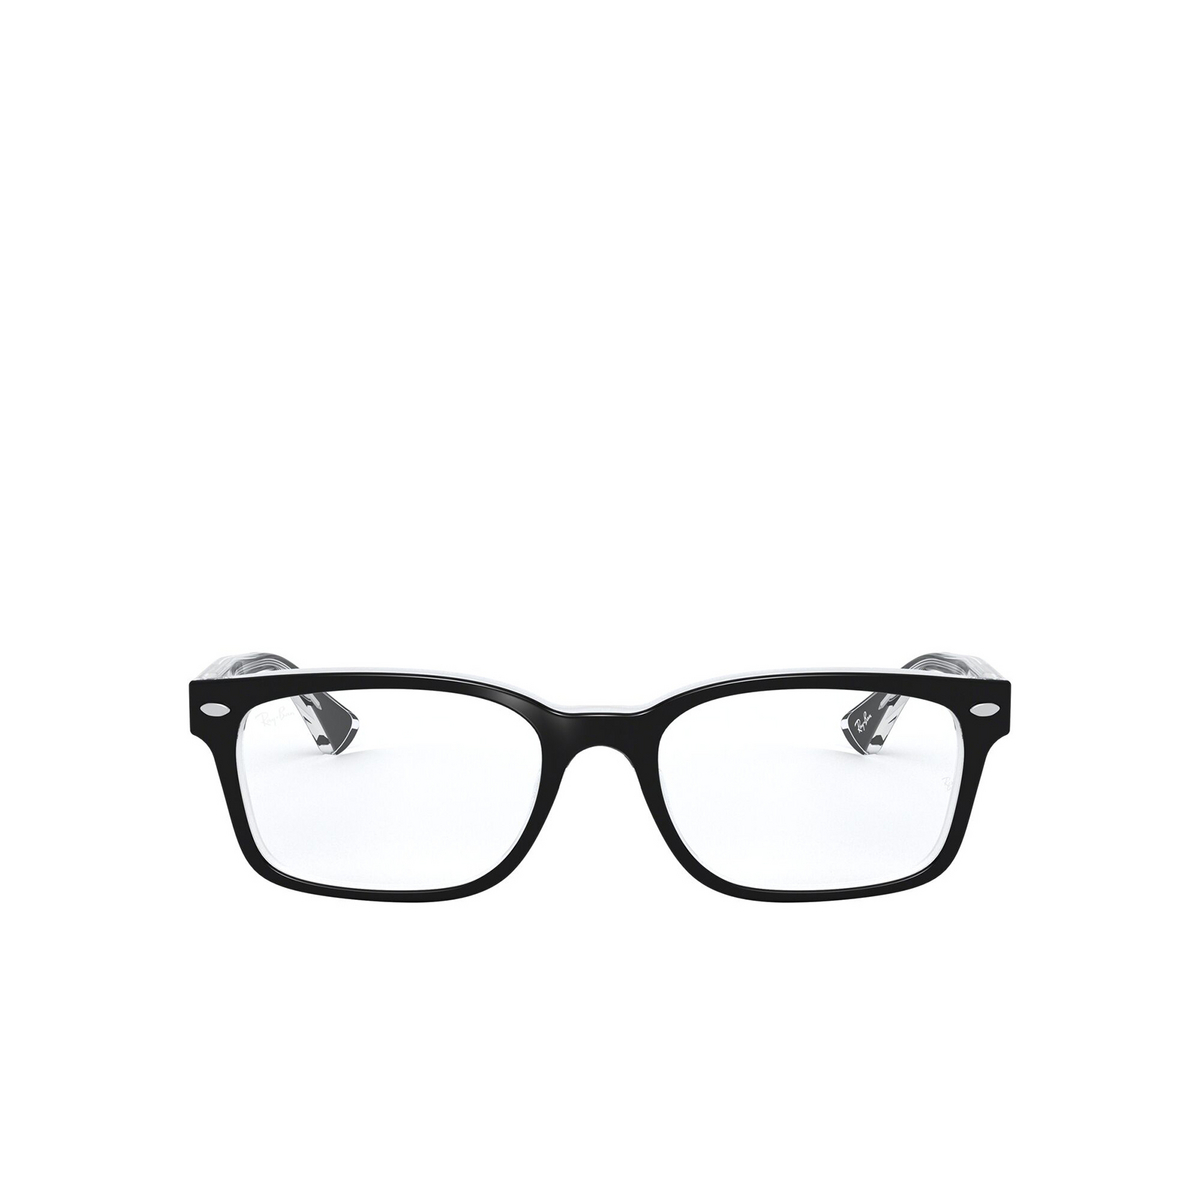 Ray-Ban RX5286 Eyeglasses 2034 Black On Transparent - front view